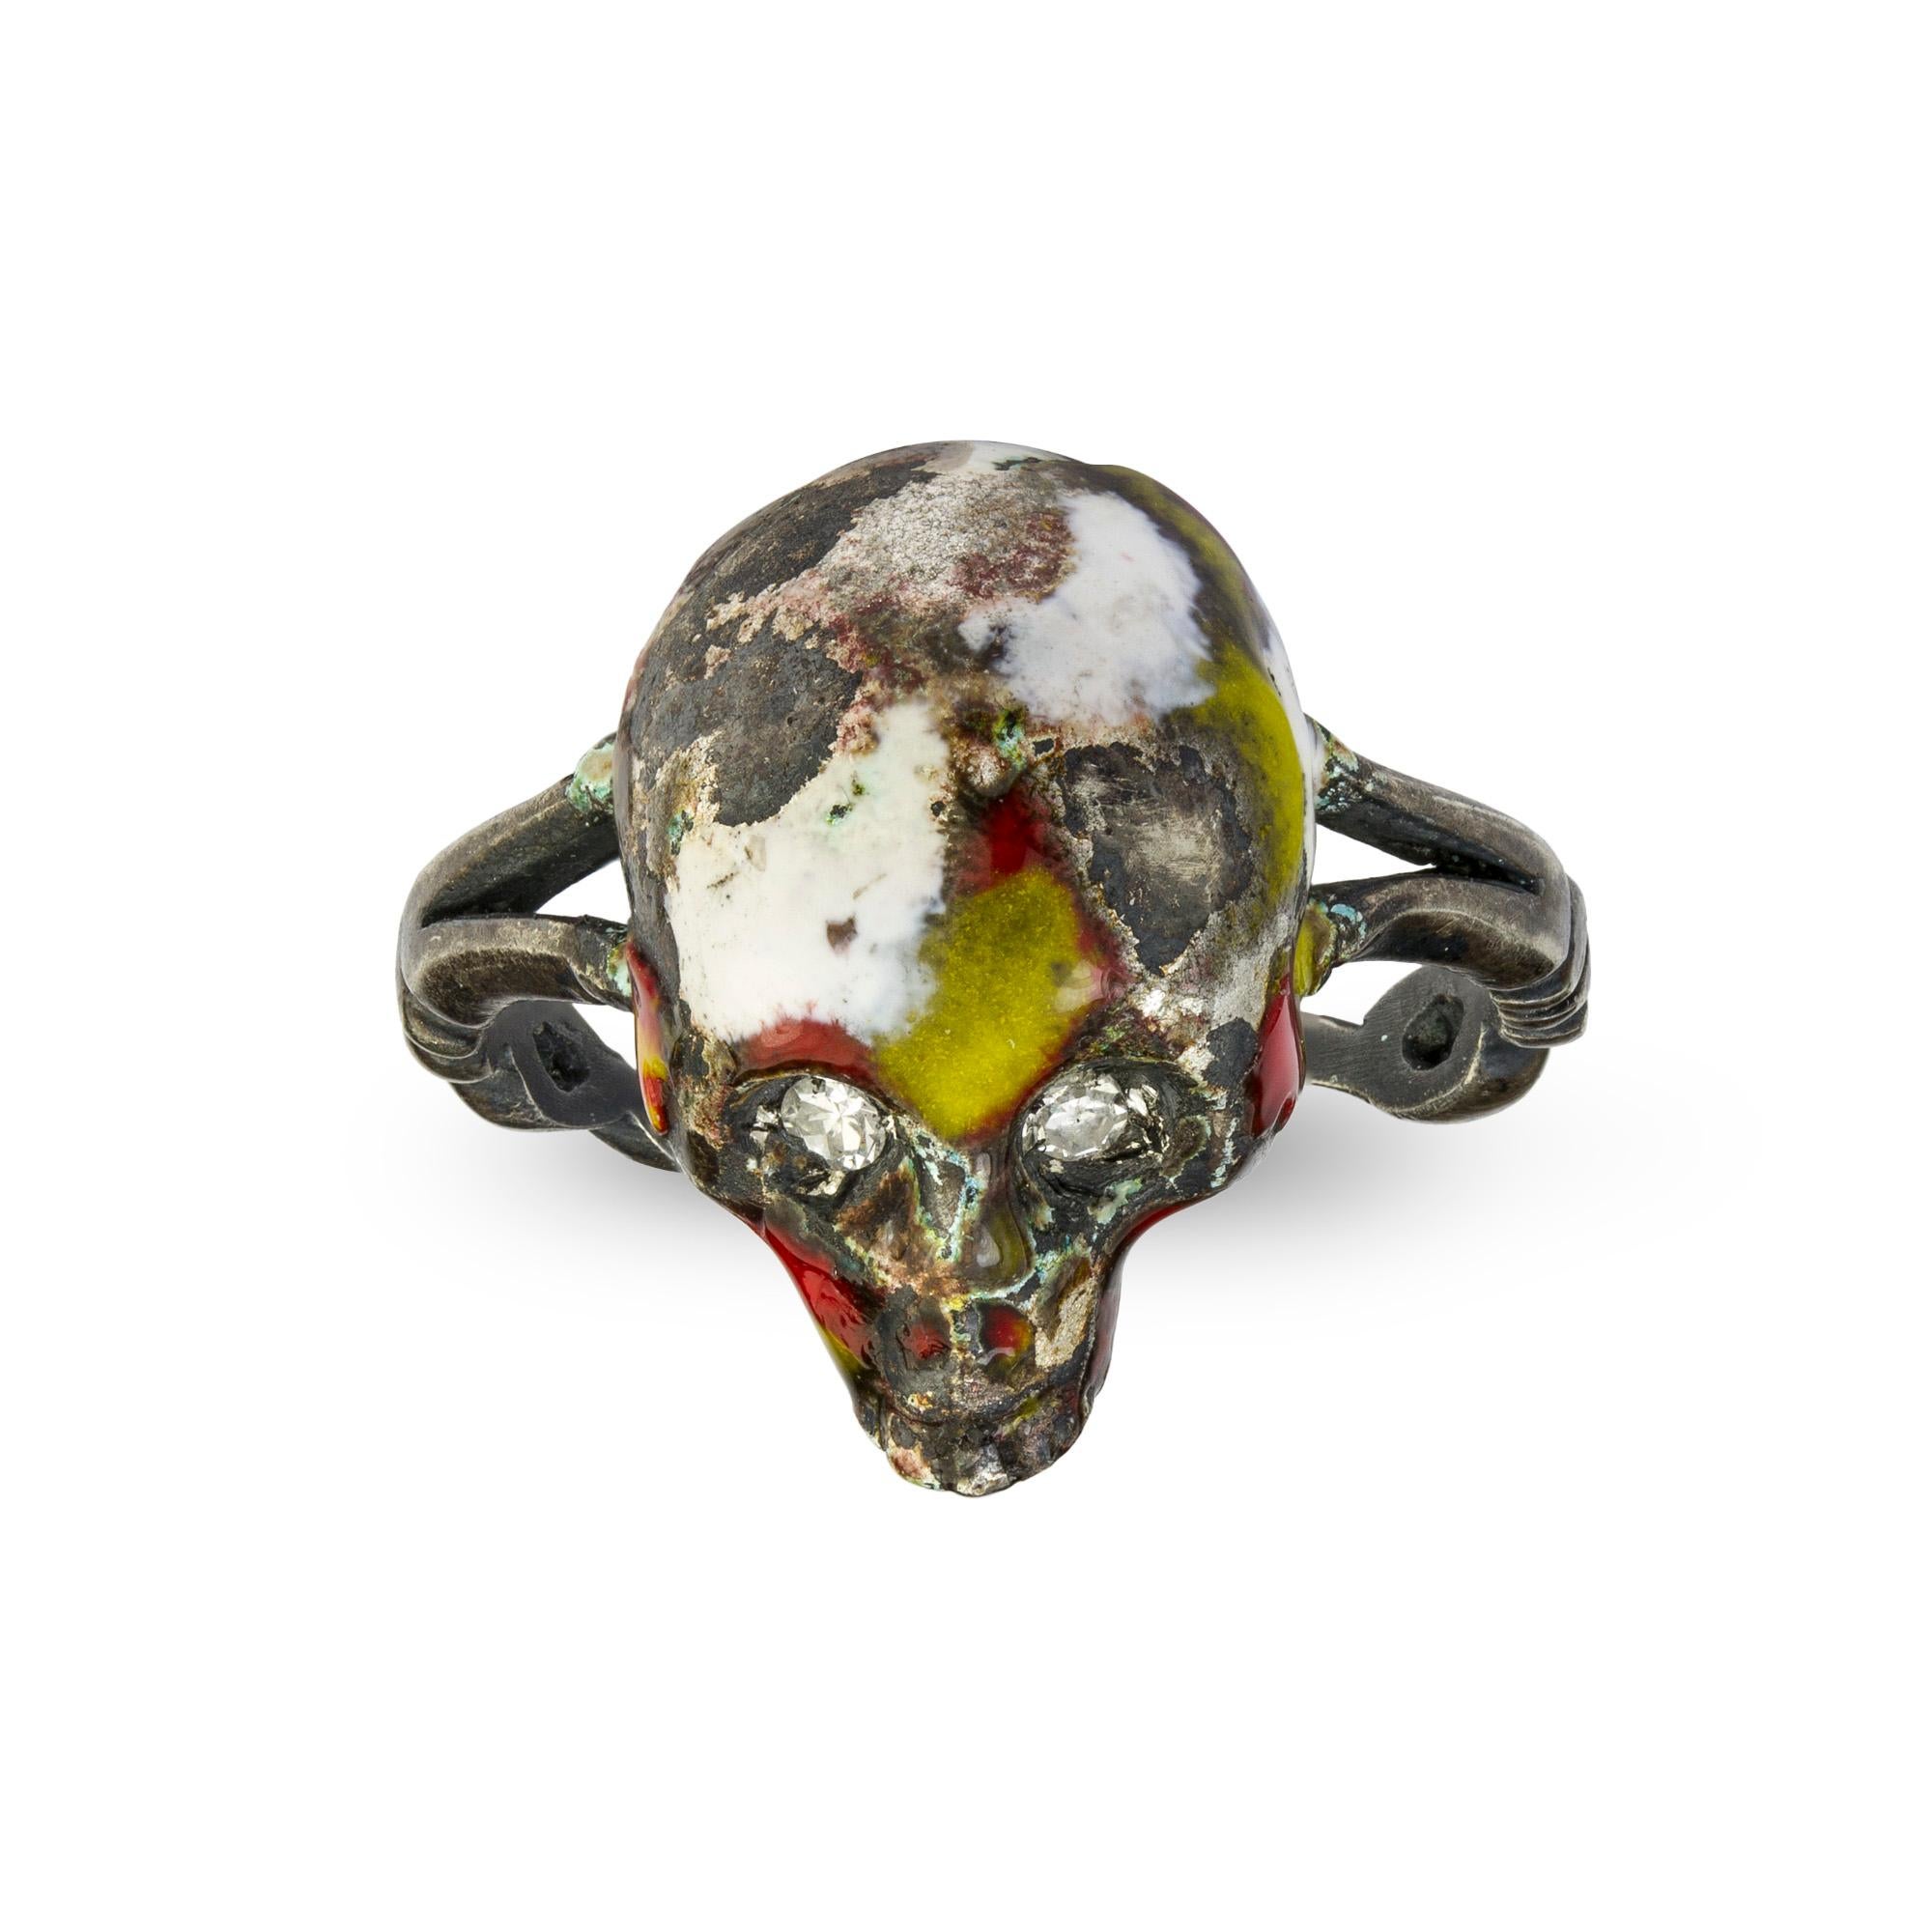 An enamel and diamond skull ring, the centre a skull and cross bones set in patchy white, yellow and red enamel with diamond-set eyes, to silver split shoulders and twisted designed shank, estimated total diamond weight 0.3cts, made by Gaetano